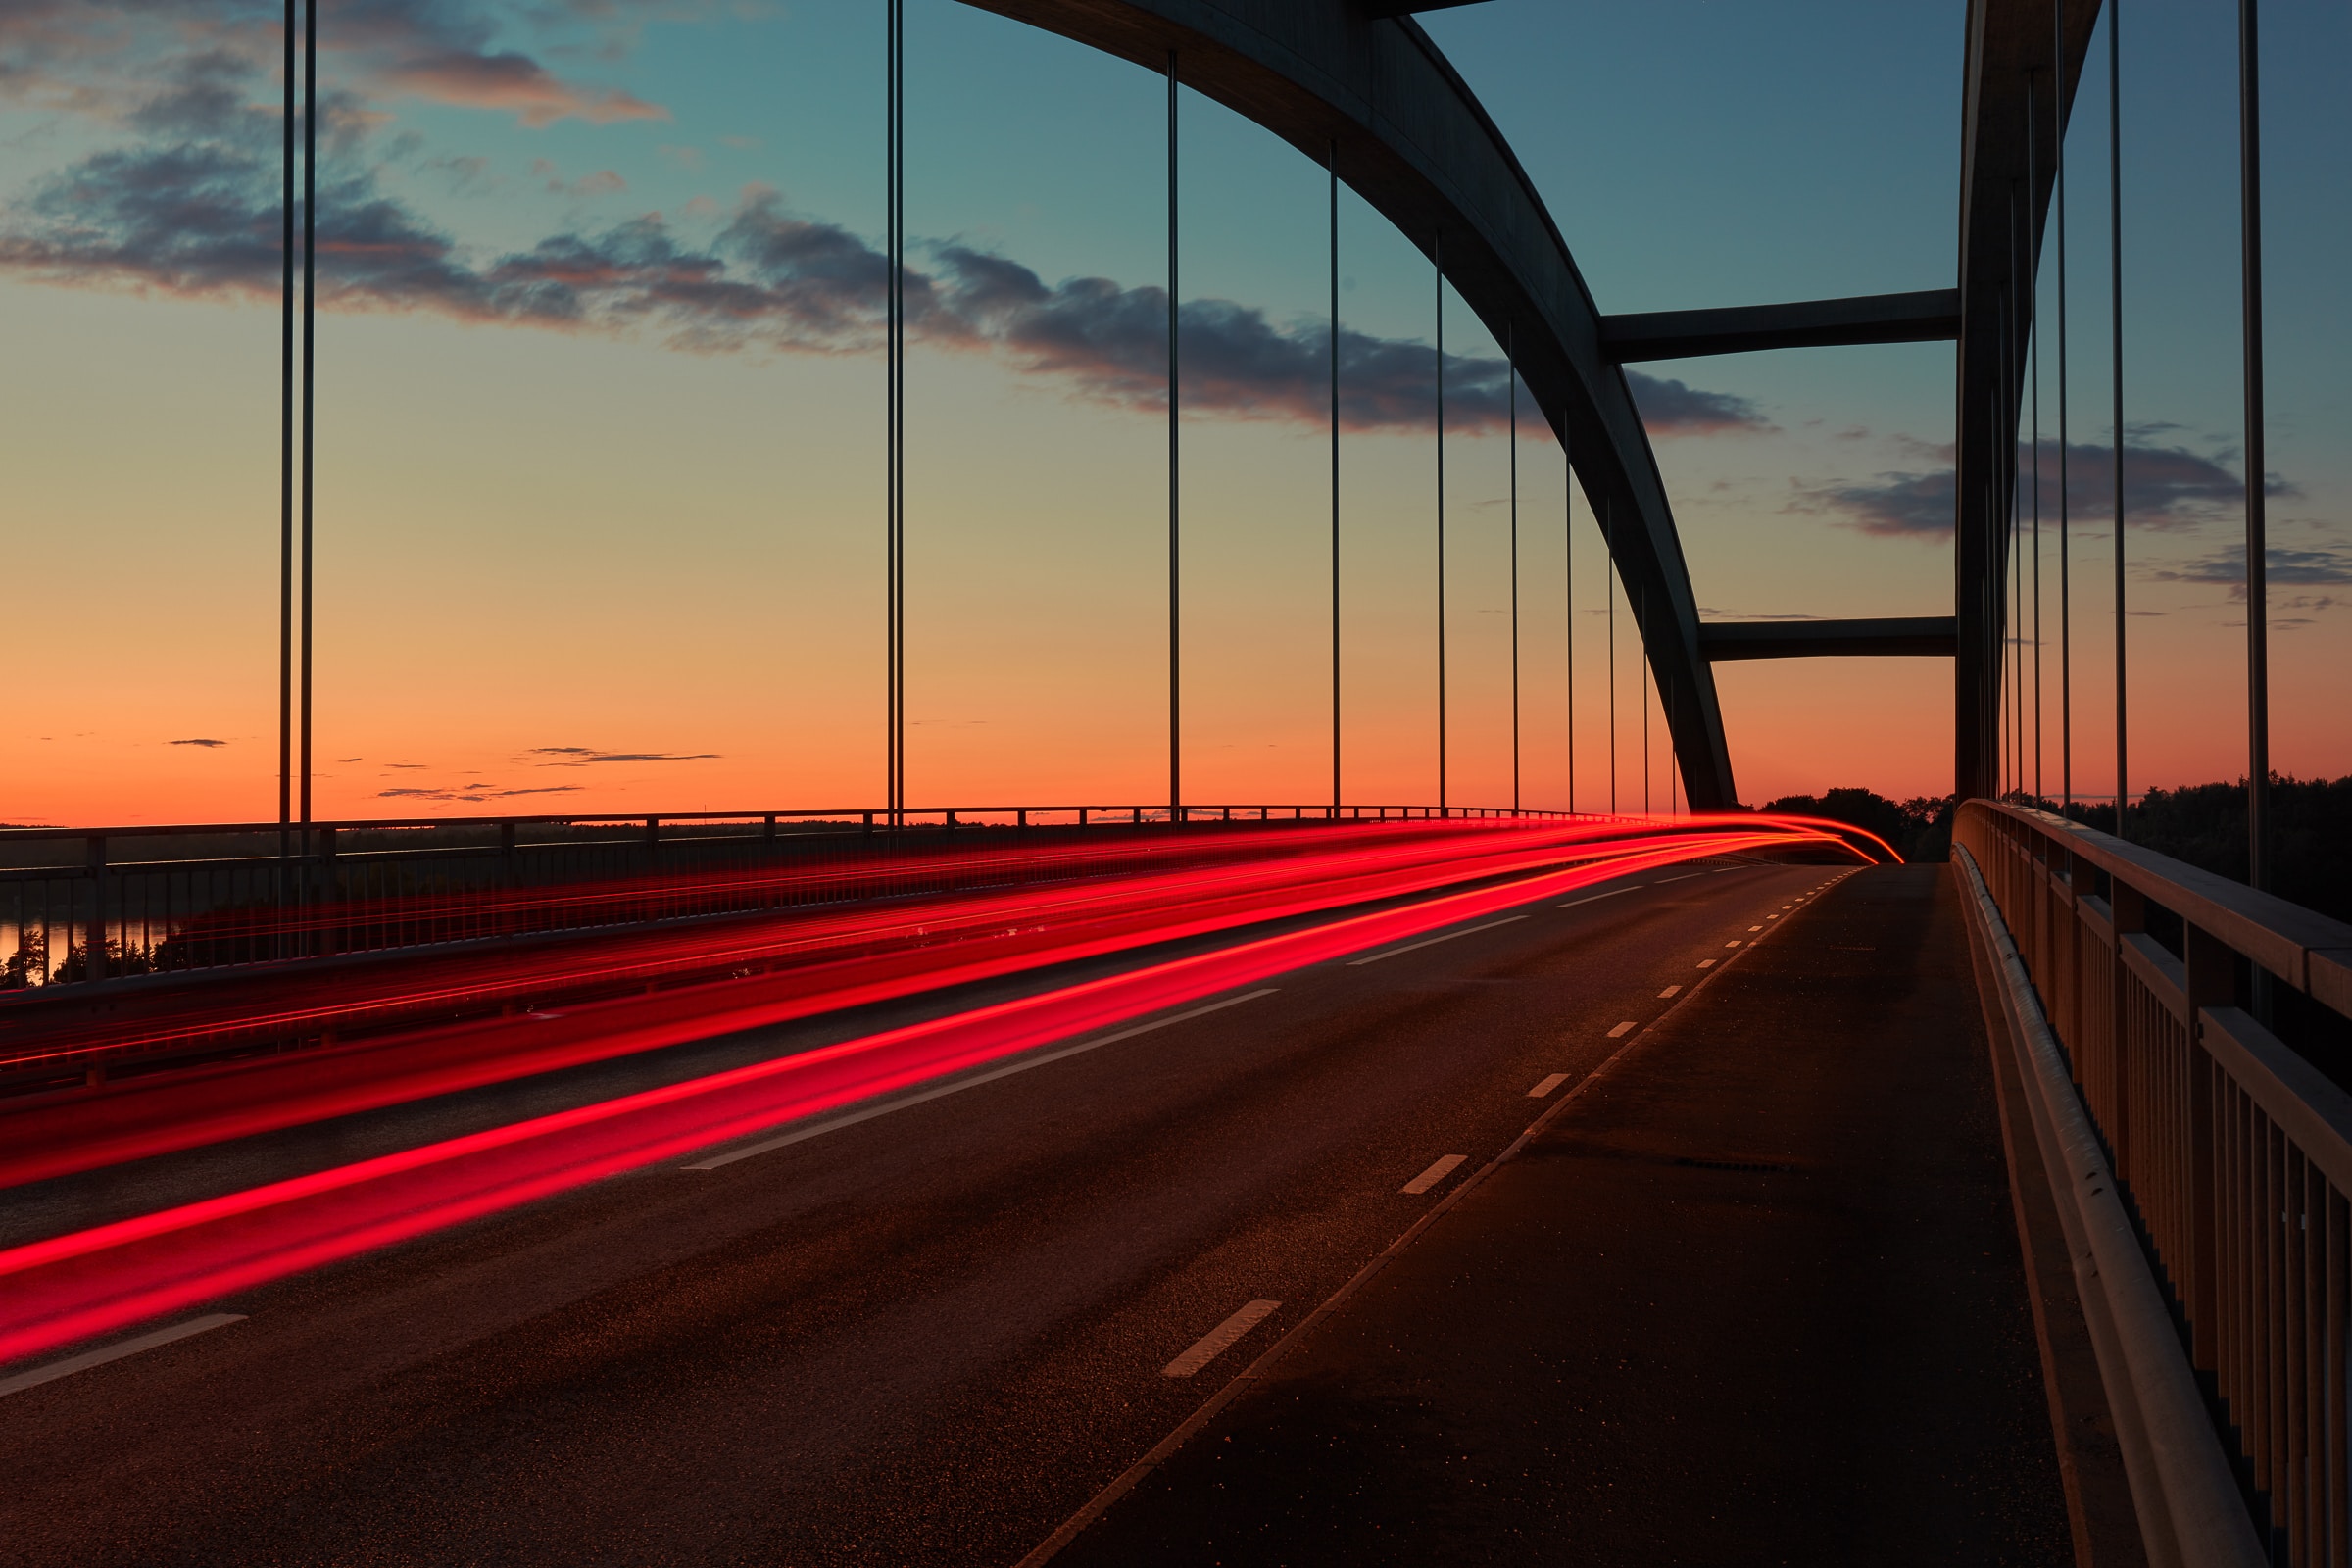 A light-trail photograph shot on a bridge at sunrise of cars’ brake lights as they quickly pass by.